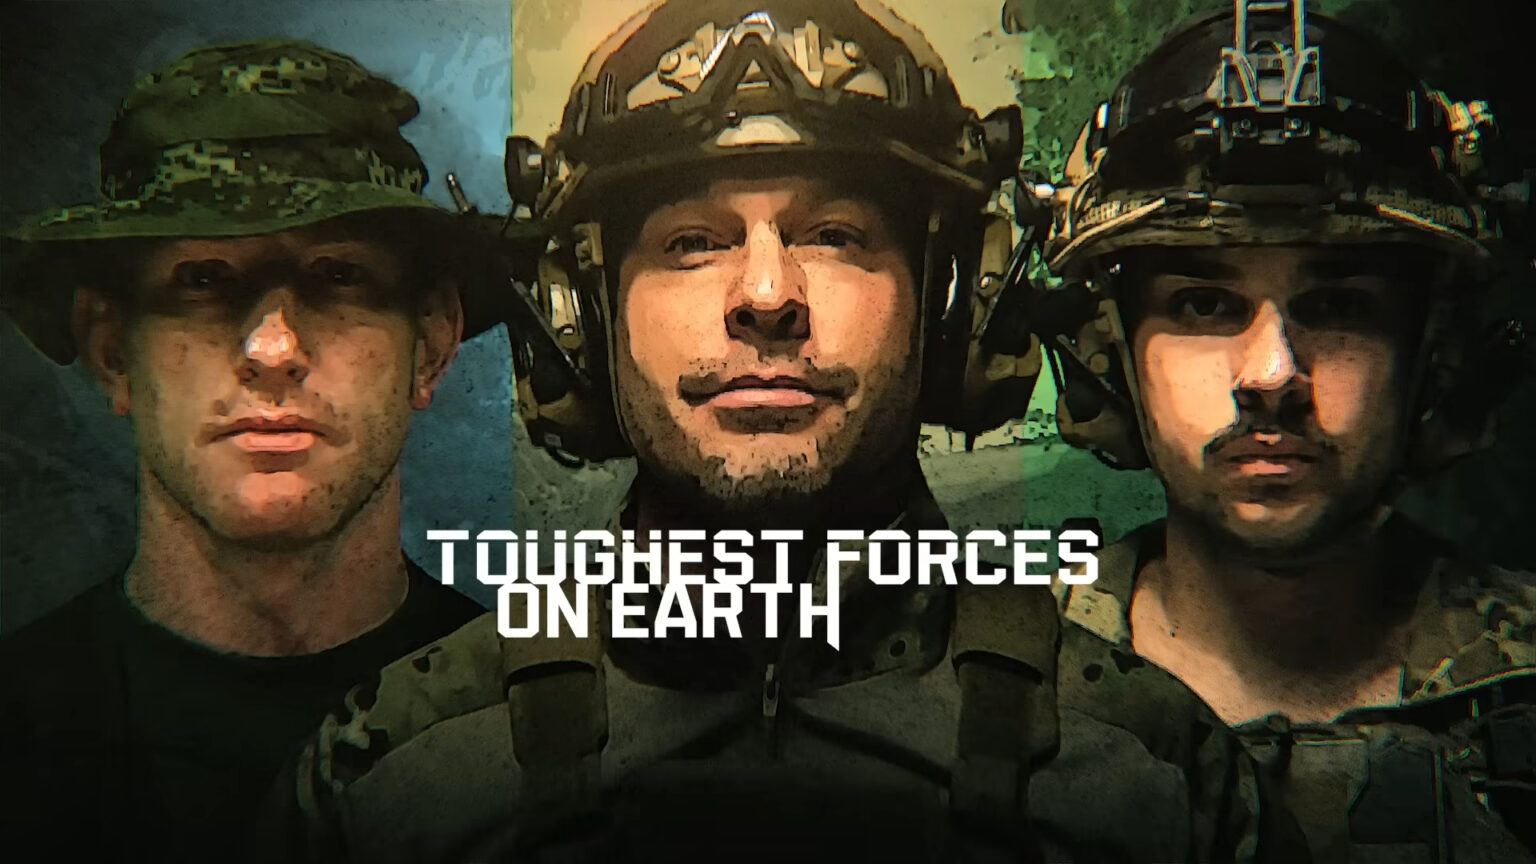 Frontline-Heroes-Toughest-Forces-on-Earth-Thumbnail-Image-Cherry-streamers